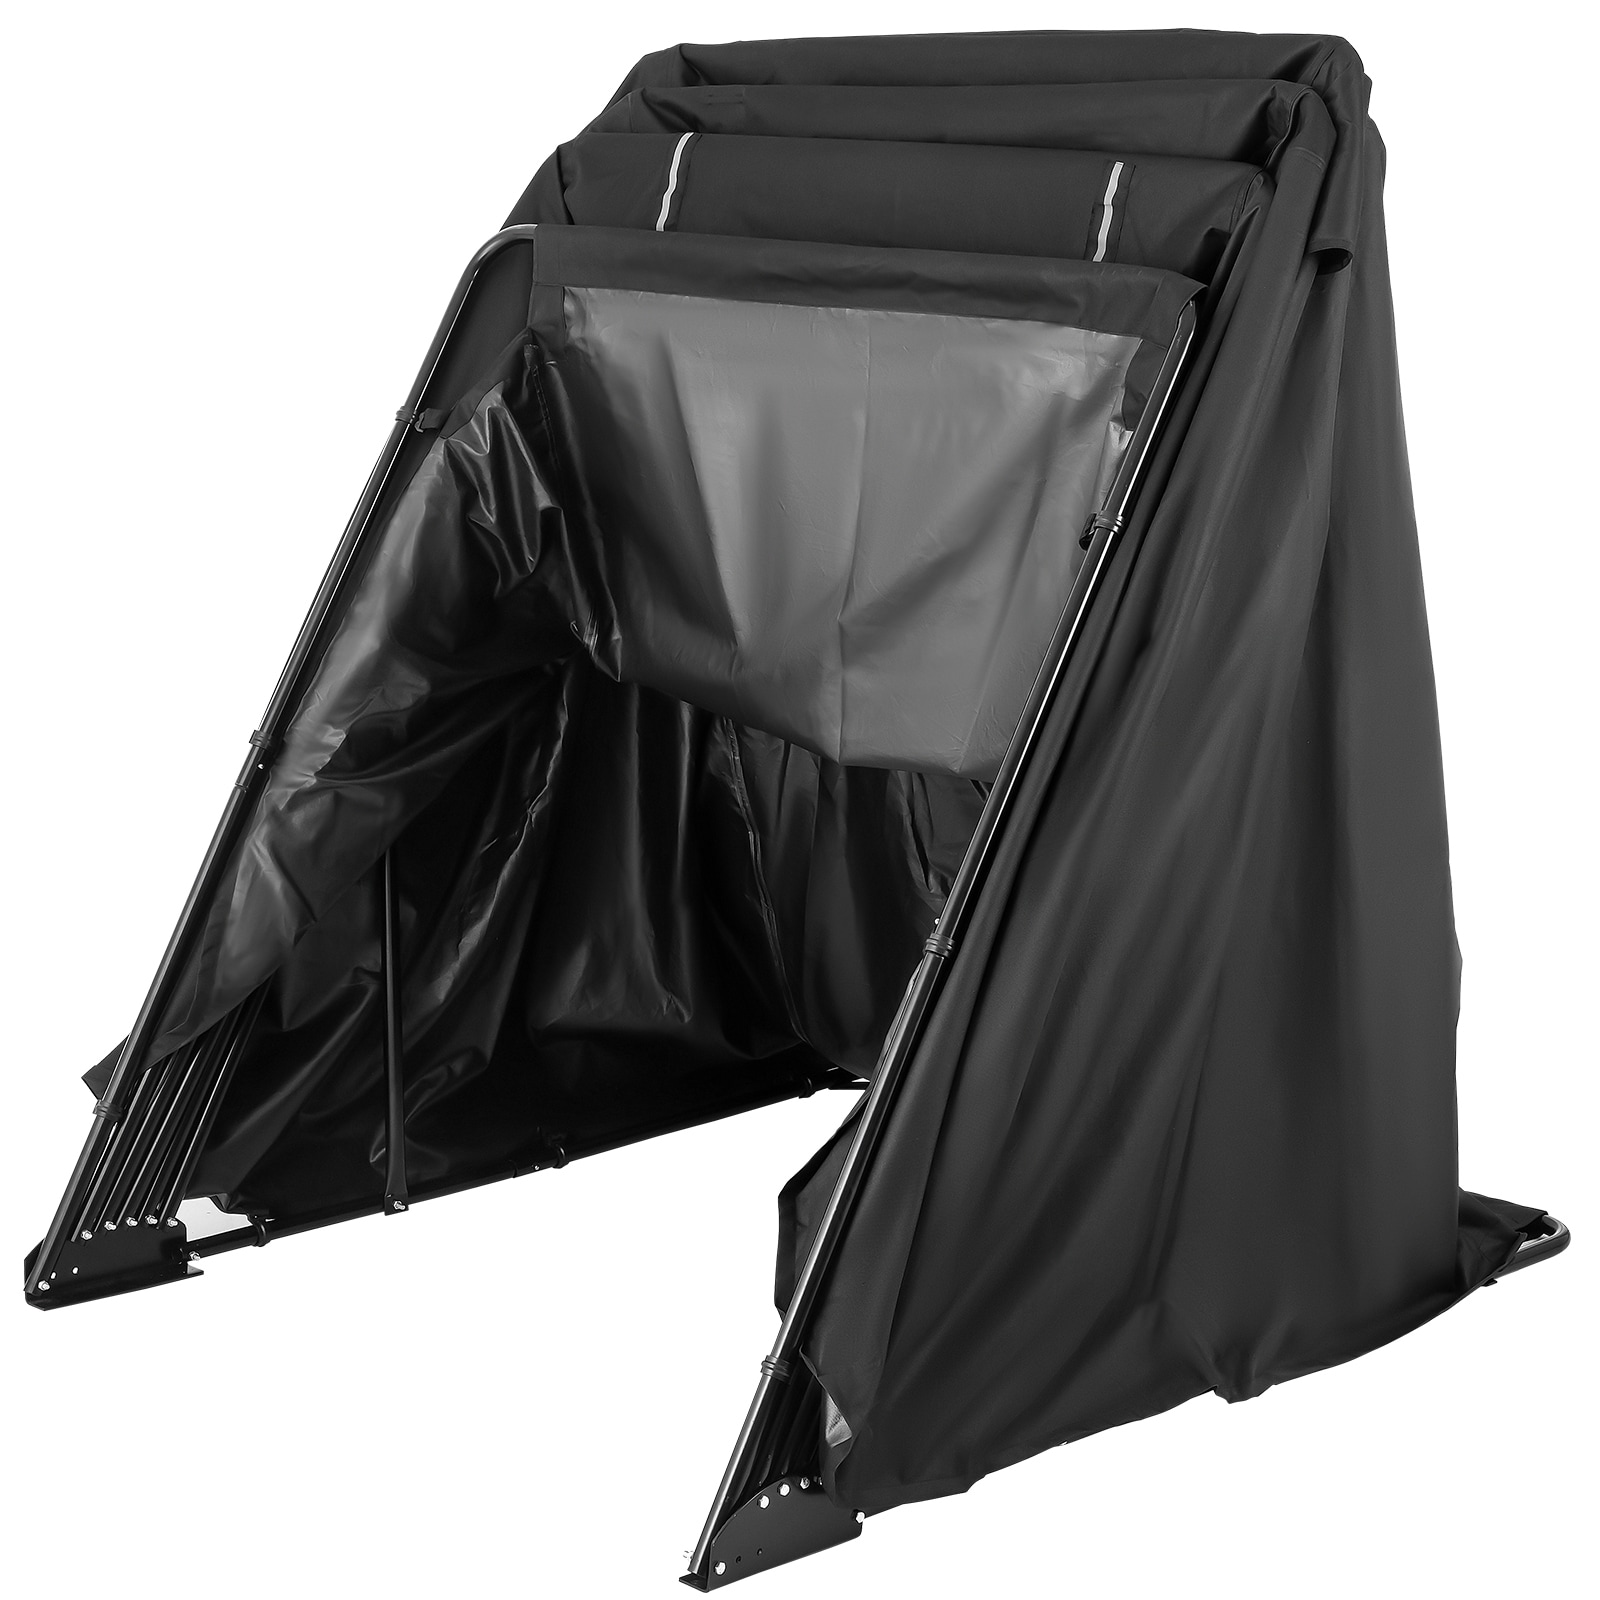 Standard Size Motorcycle Shelter Cover Garage - StormProtector®